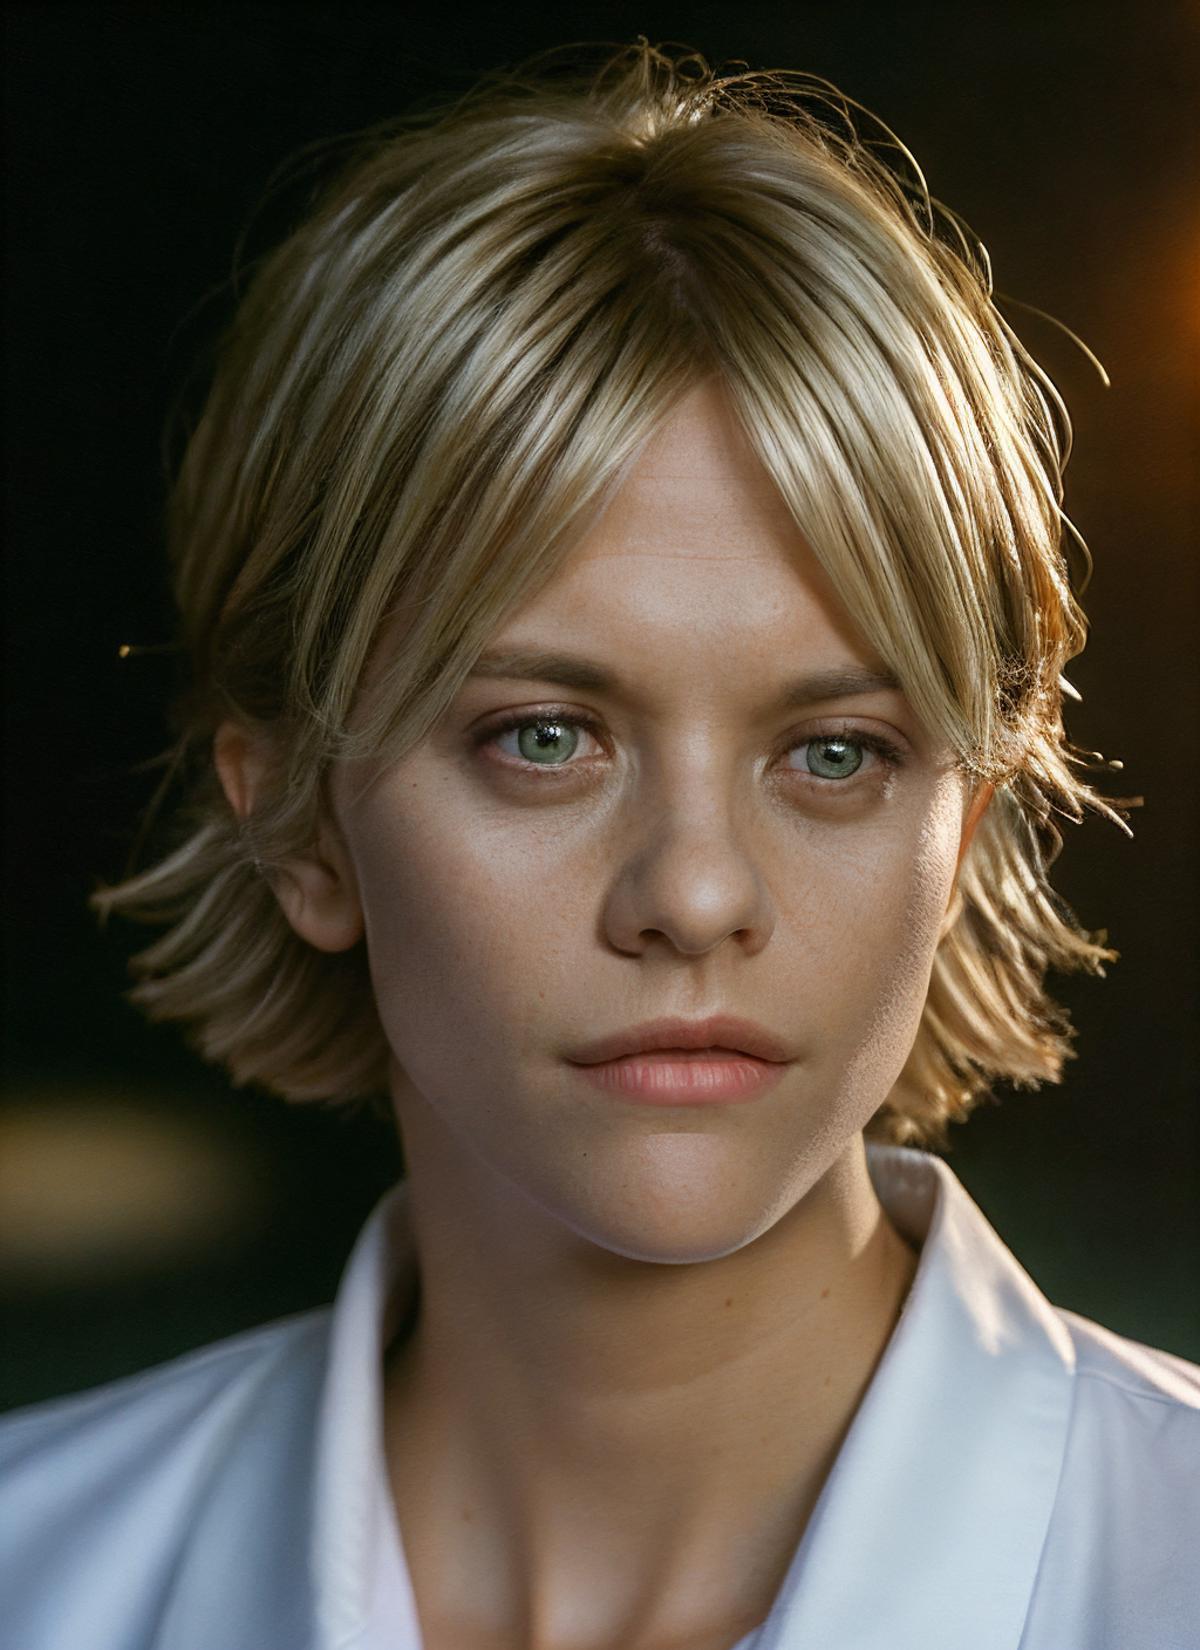 Meg Ryan (from her first movies) image by astragartist